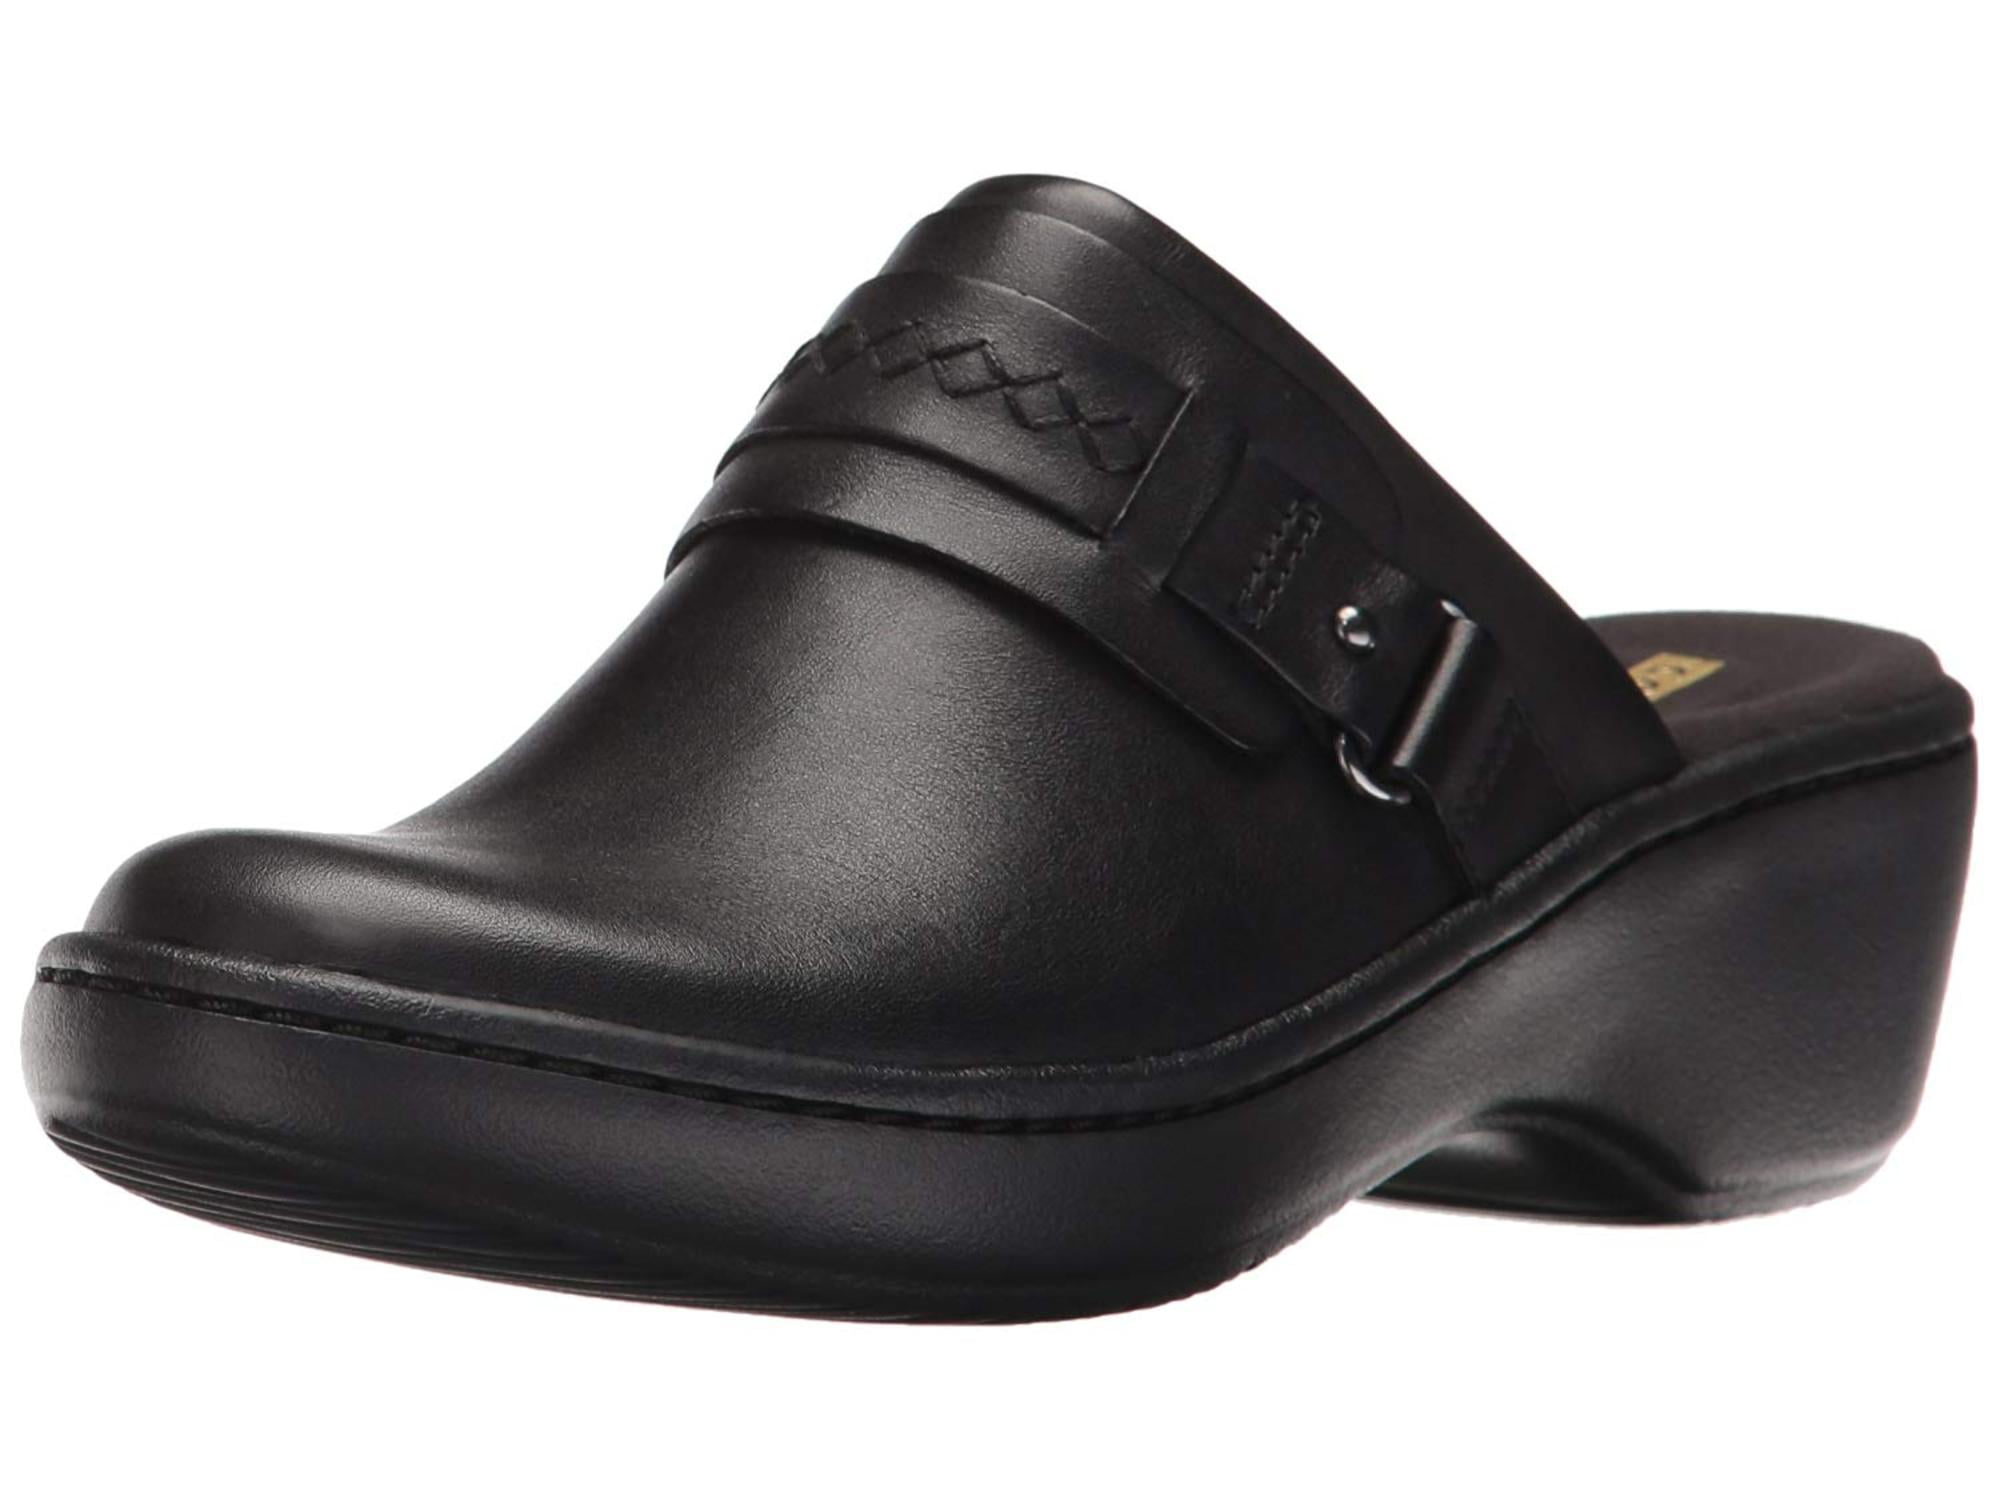 clarks leather clogs